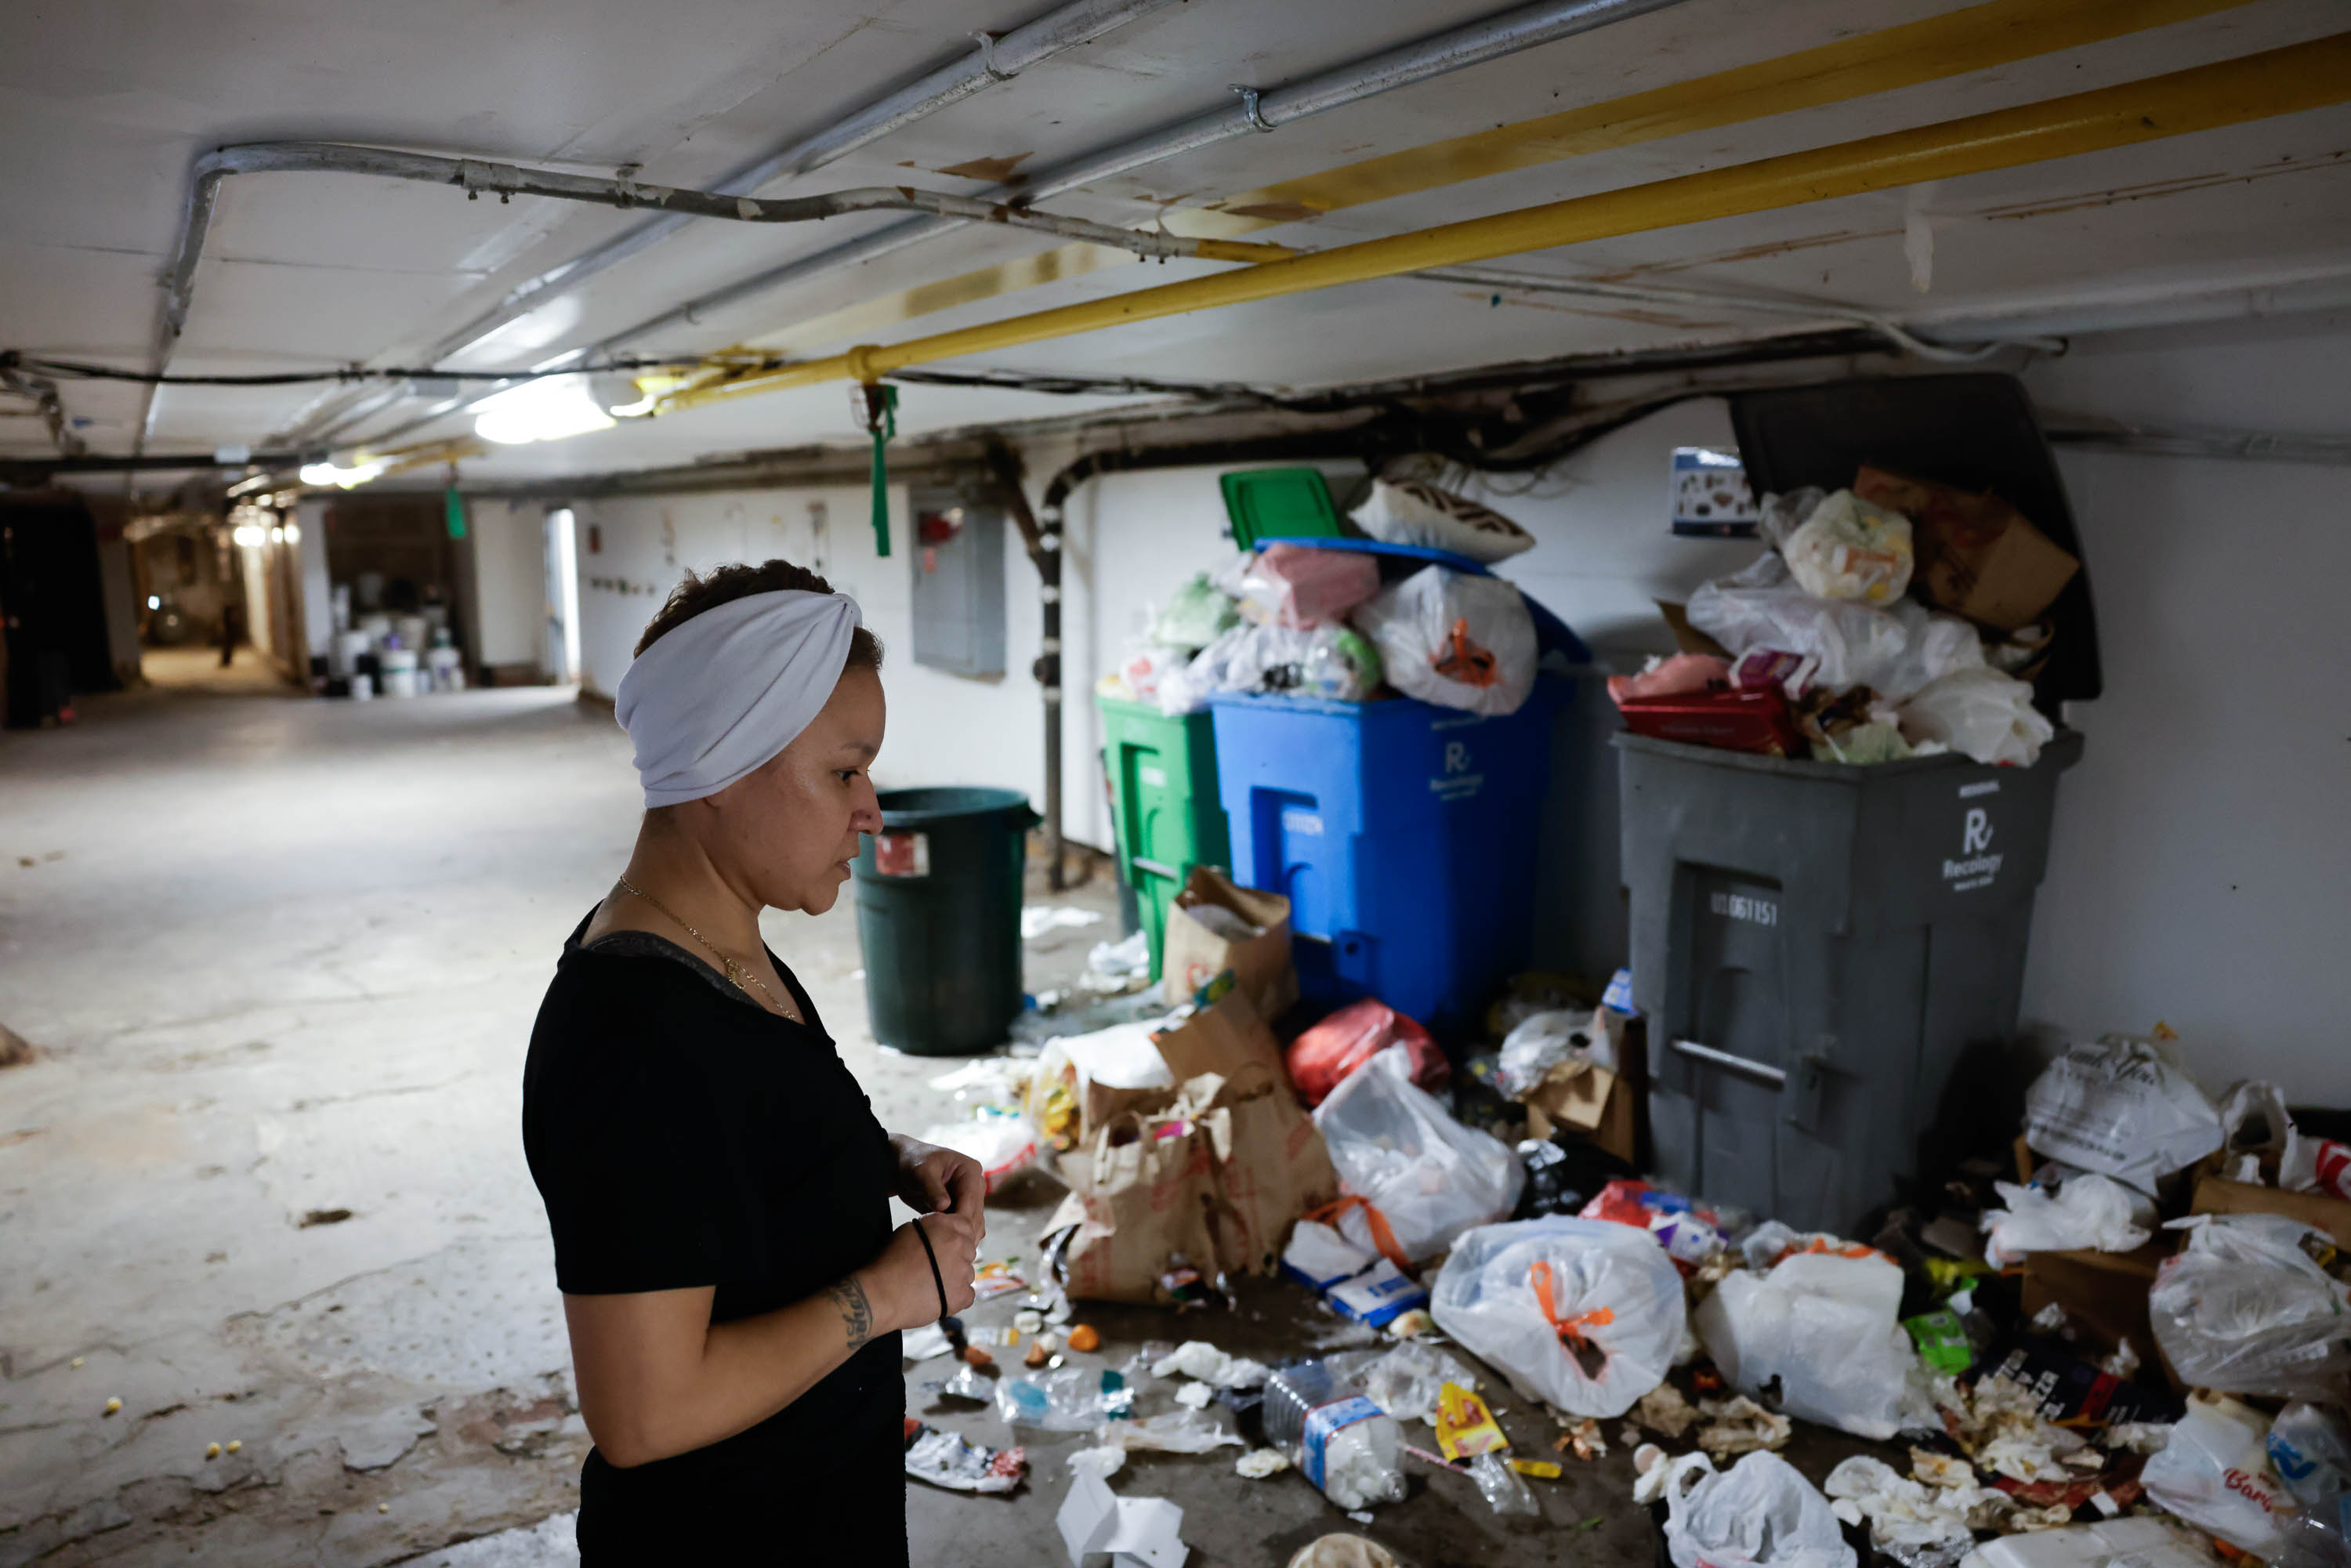 A person stands near overflowing trash bins in a dimly lit garage.